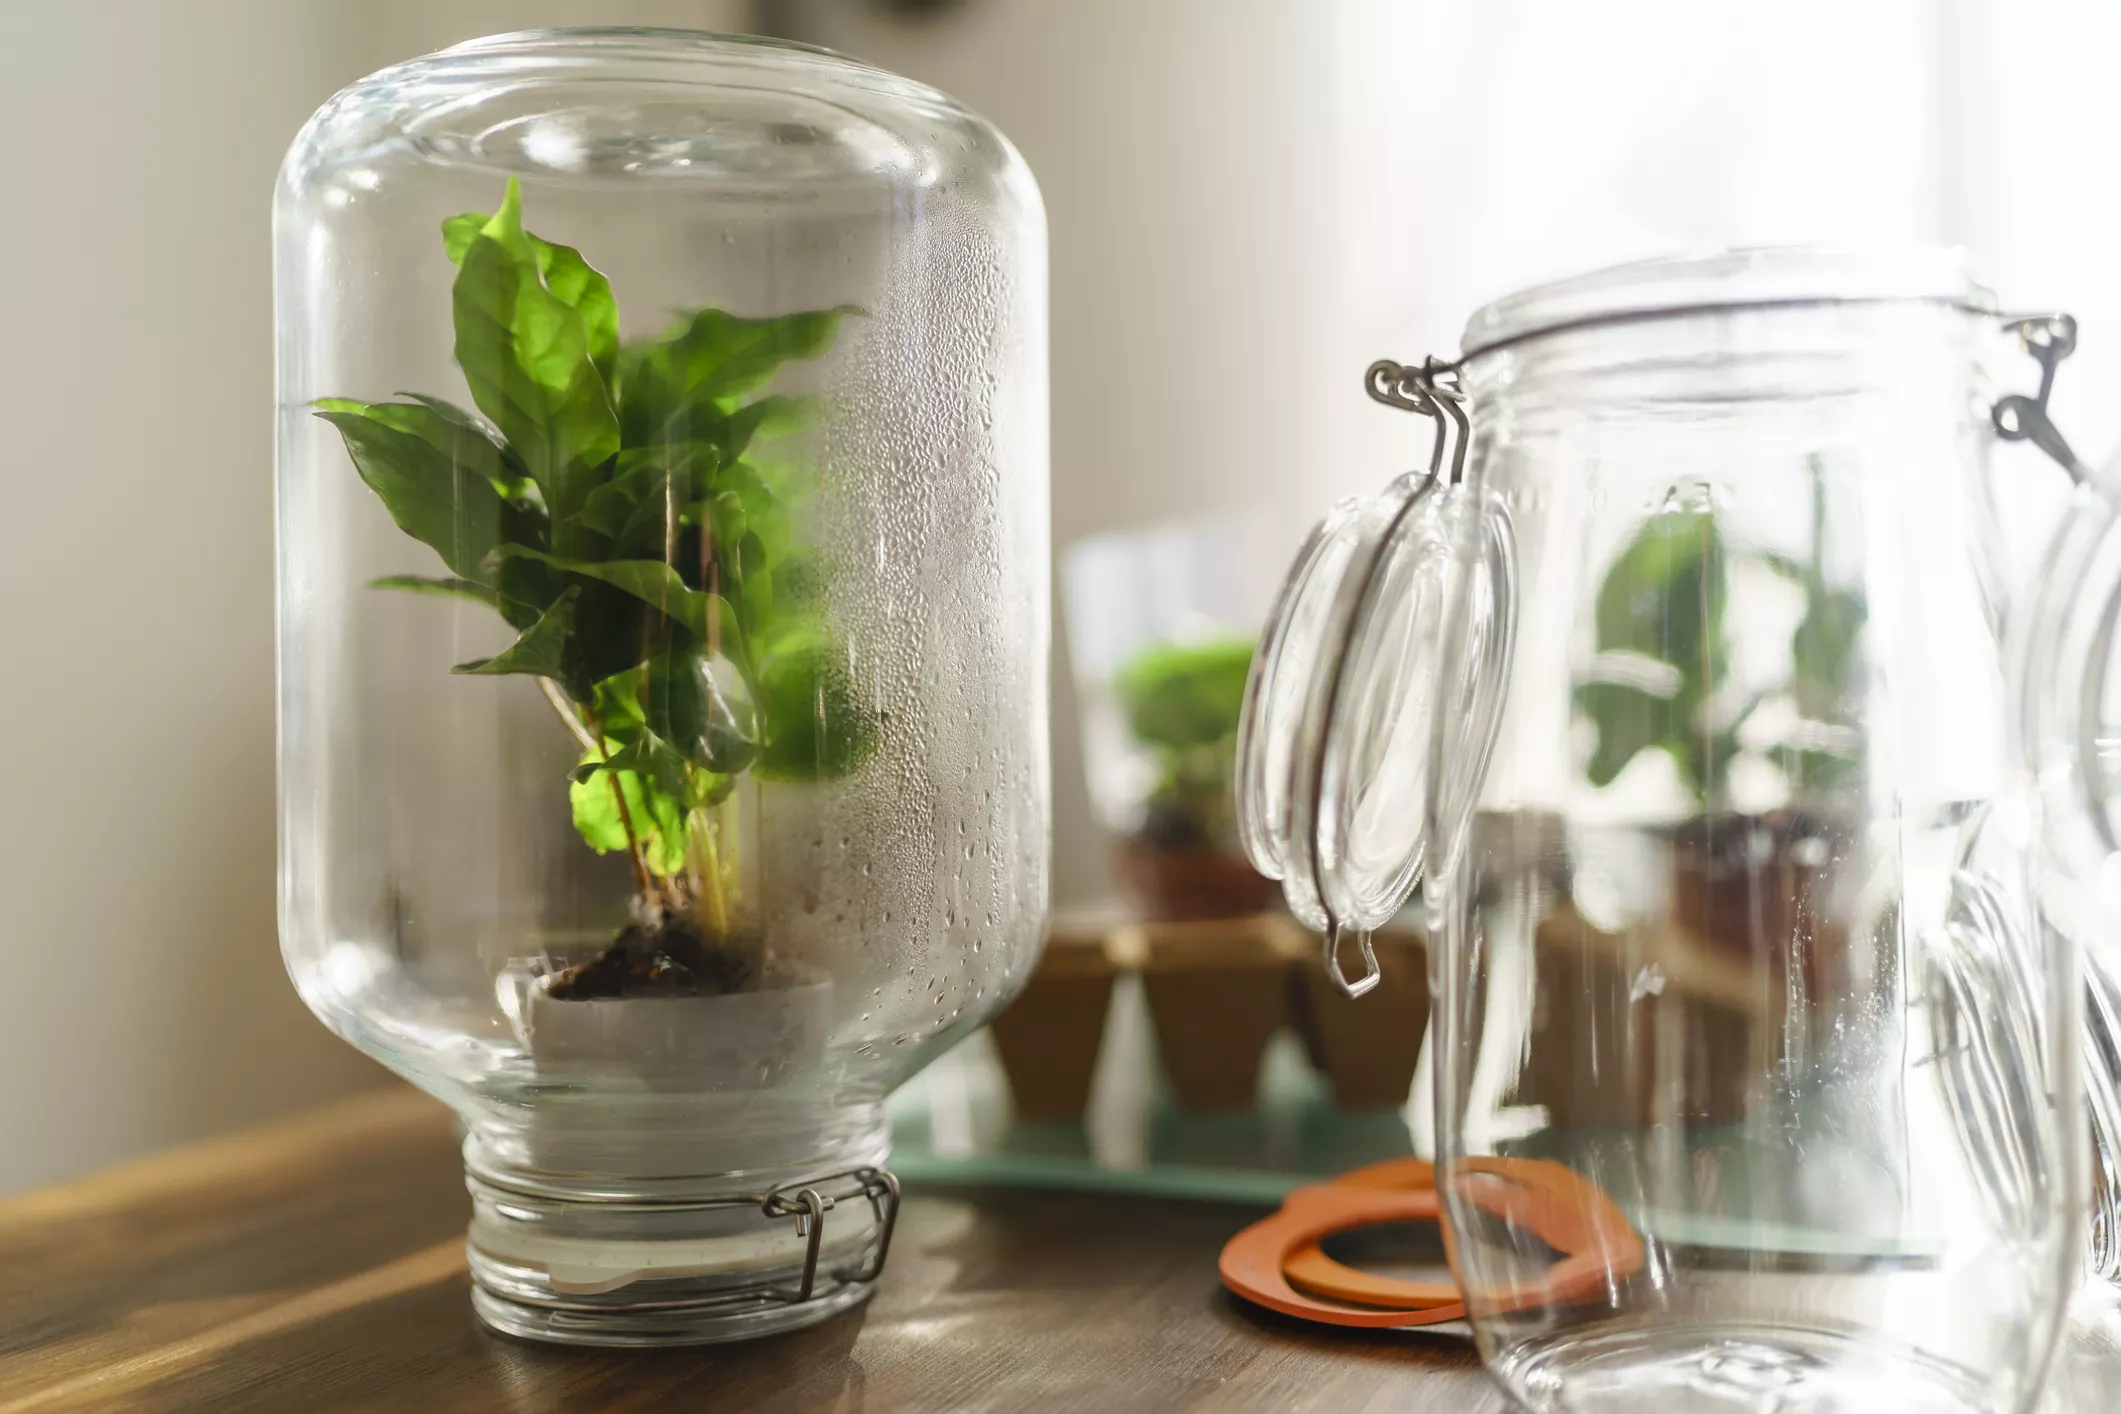 Coffee plant in a preserving jar